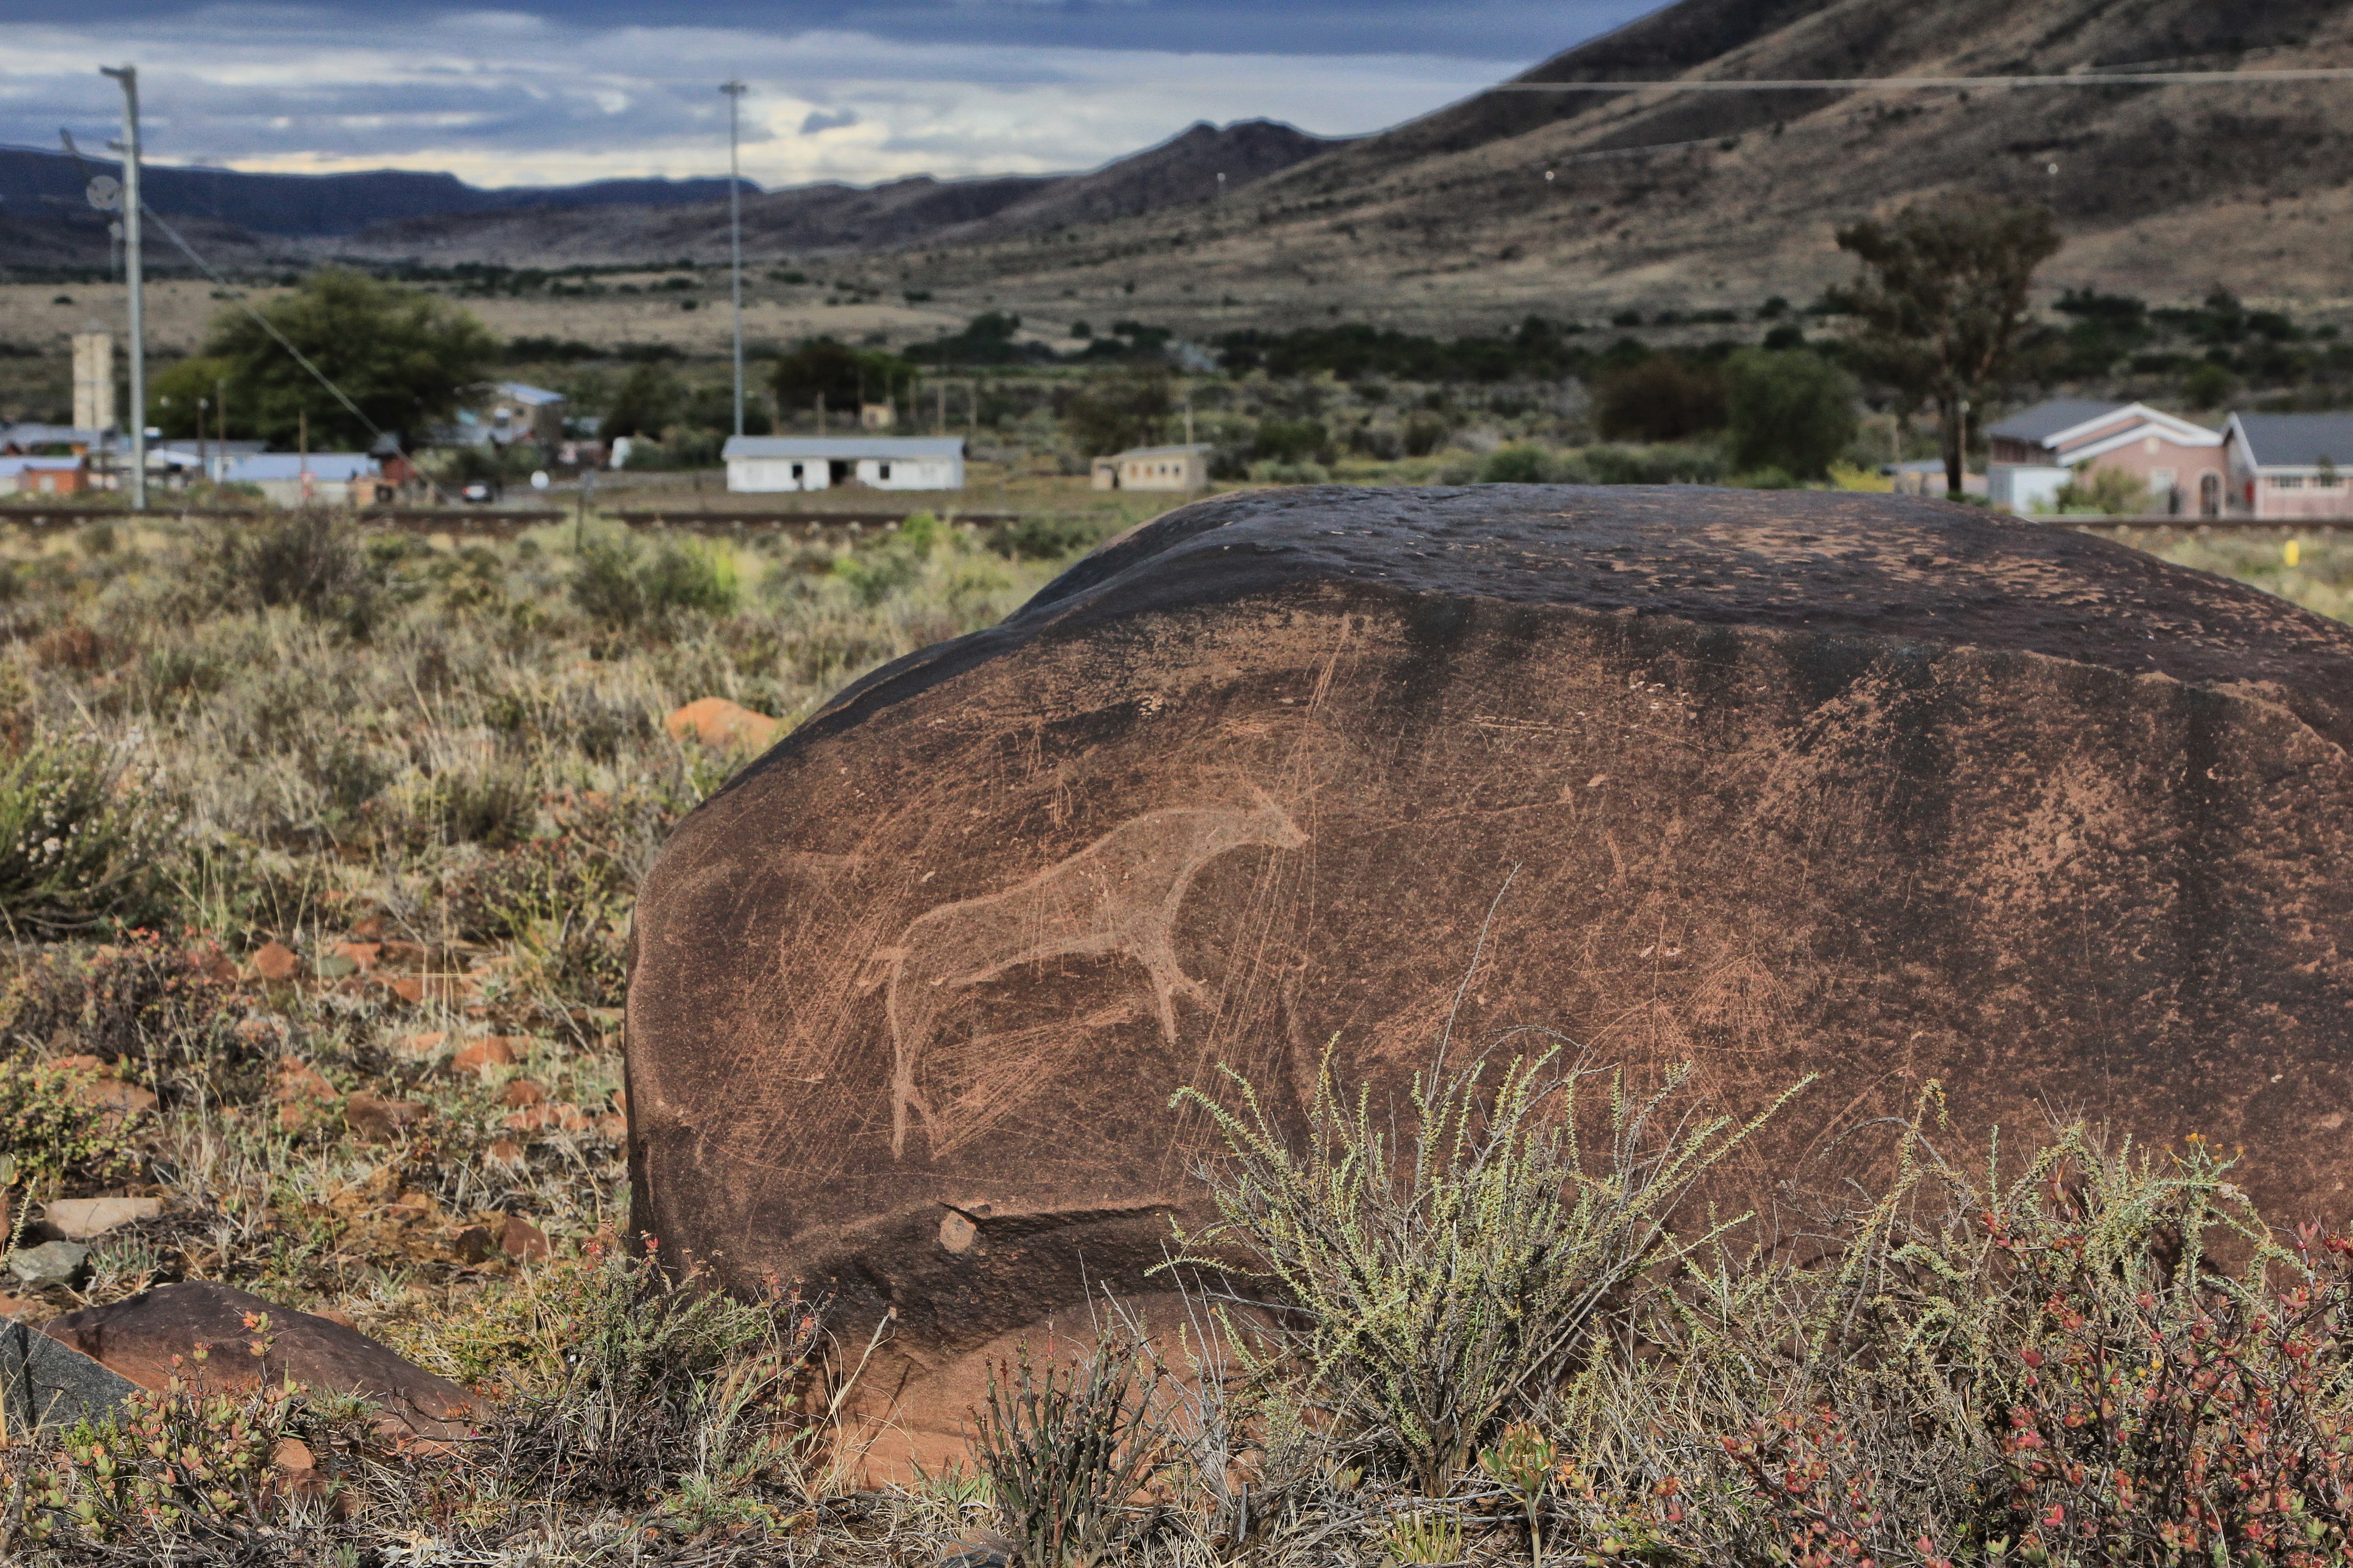 A simple blesbok engraving on a large dolerite rock, with Nelspoort in the background. Image: Chris Marais